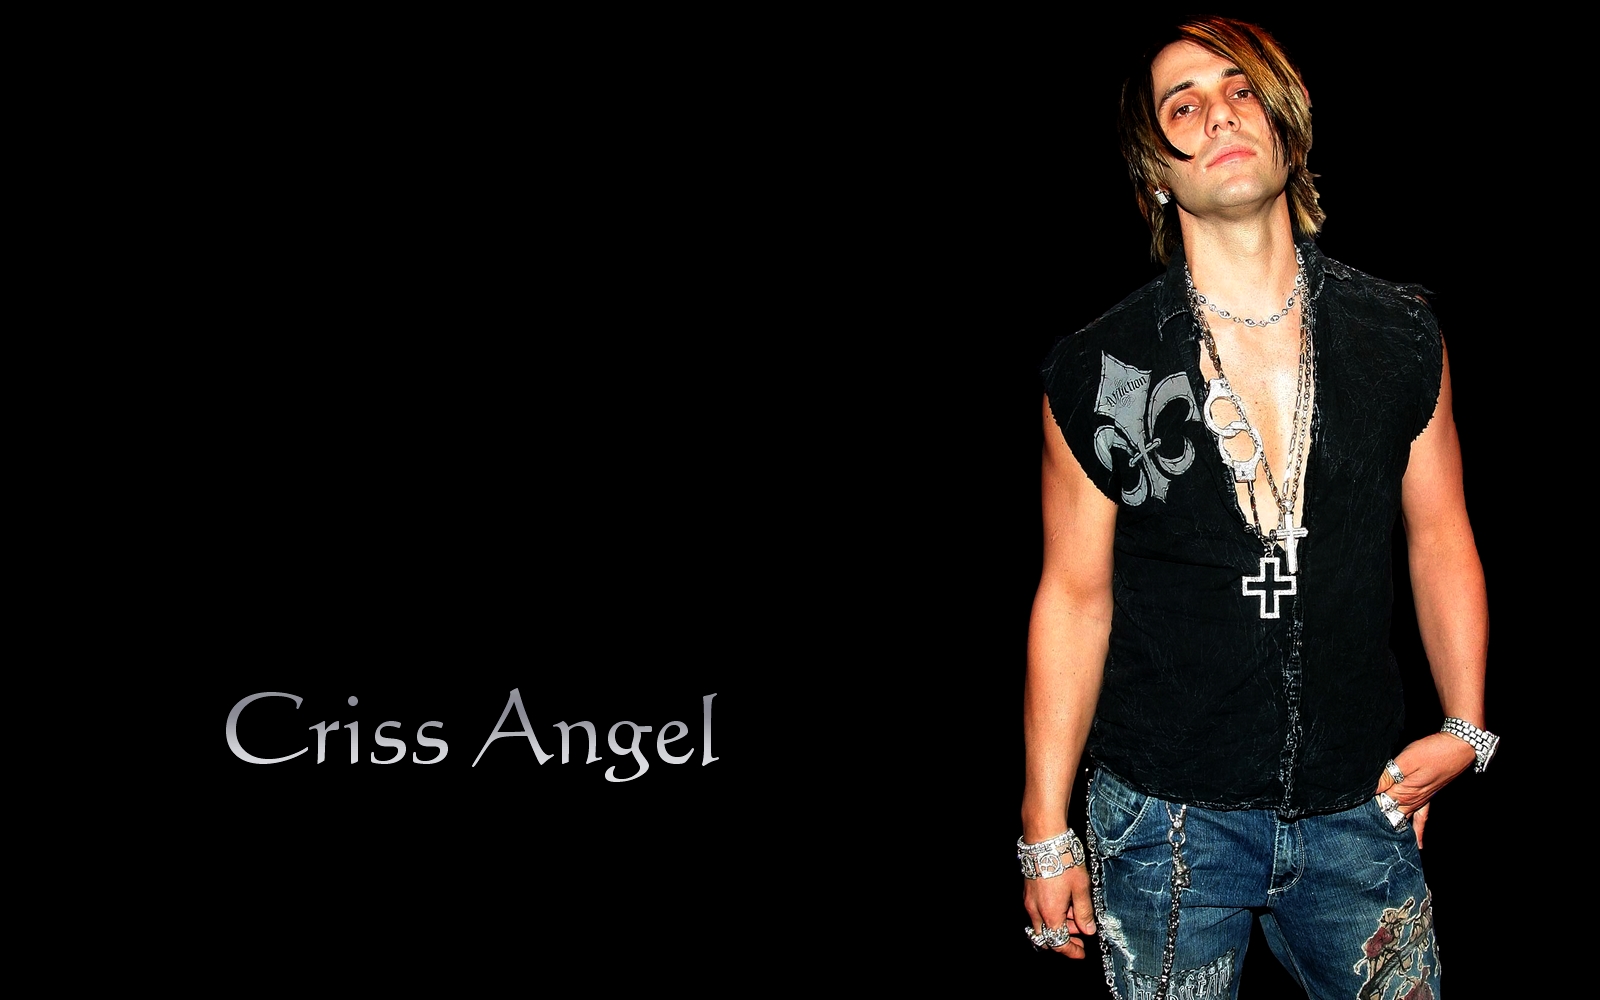 Gallery For Gt Criss Angel Wallpaper